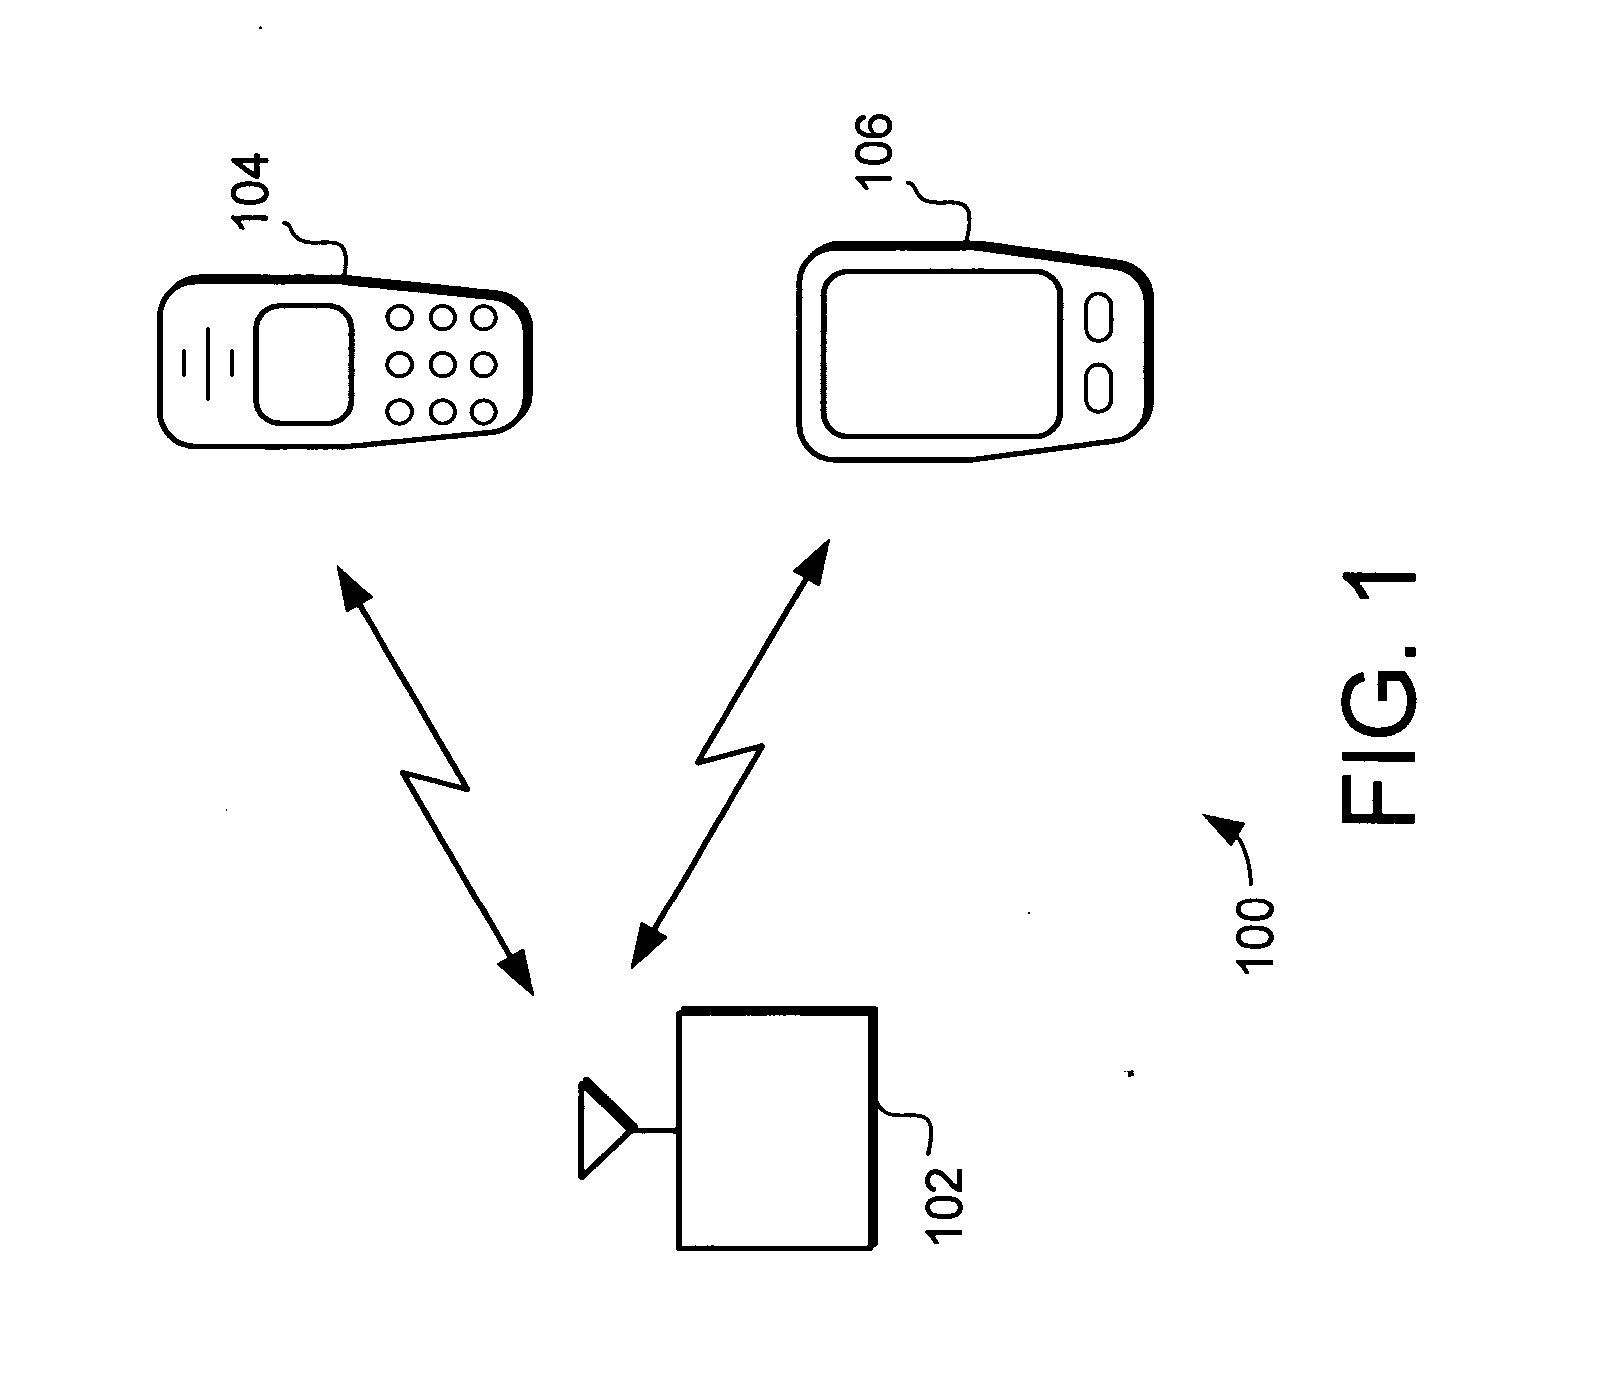 System and method for over-the-air update of wireless communication devices